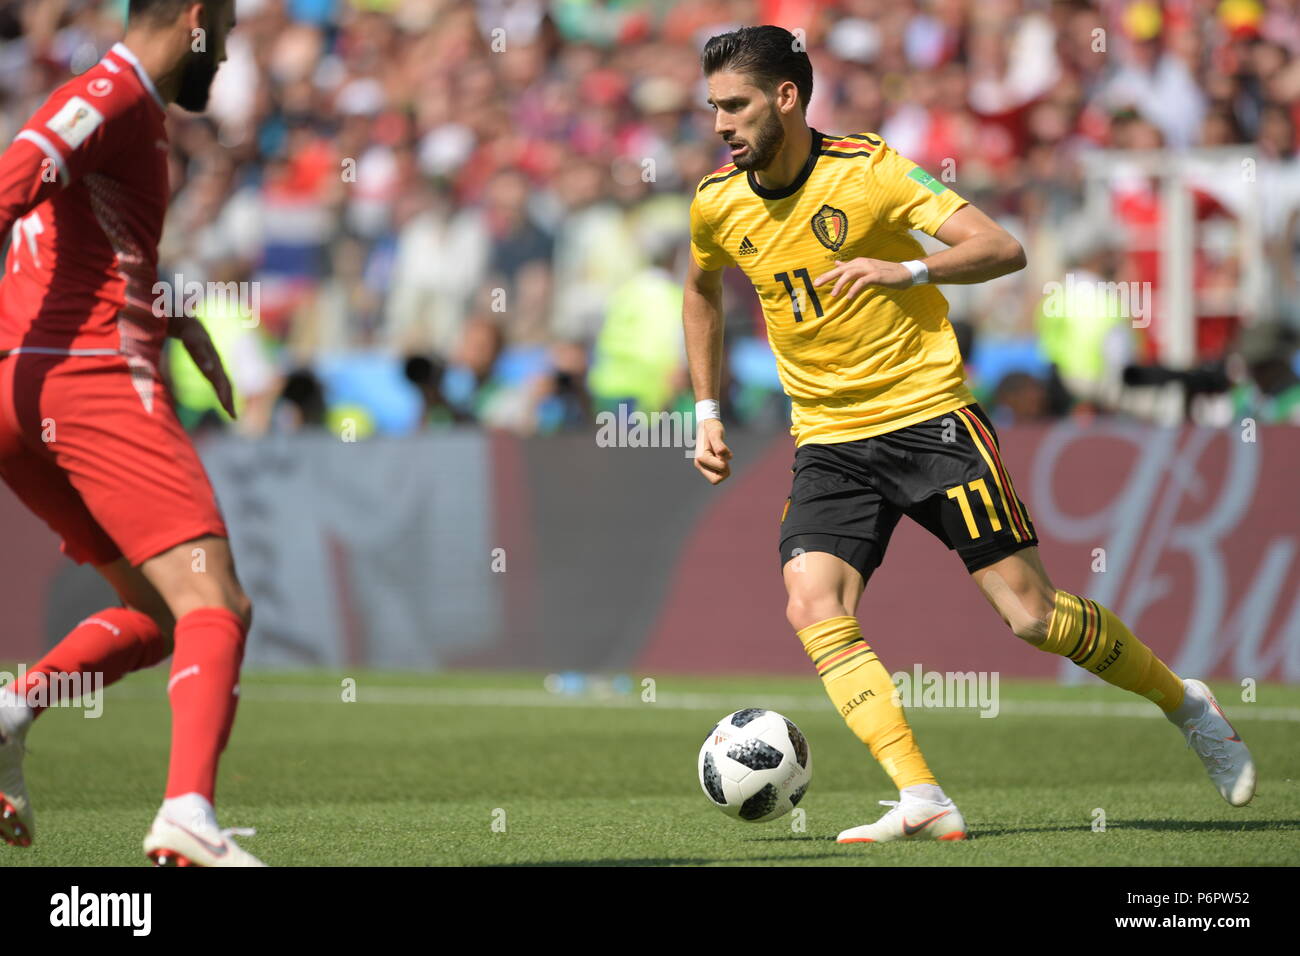 Yannick Ferreira Carrasco (BEL), FIFA World Cup Russia 2018 Group G match between Belgium 5-2 Tunisia at Spartak Stadium in Moscow, Russia, June 23, 2018. (Photo by FAR EAST PRESS/AFLO) Stock Photo